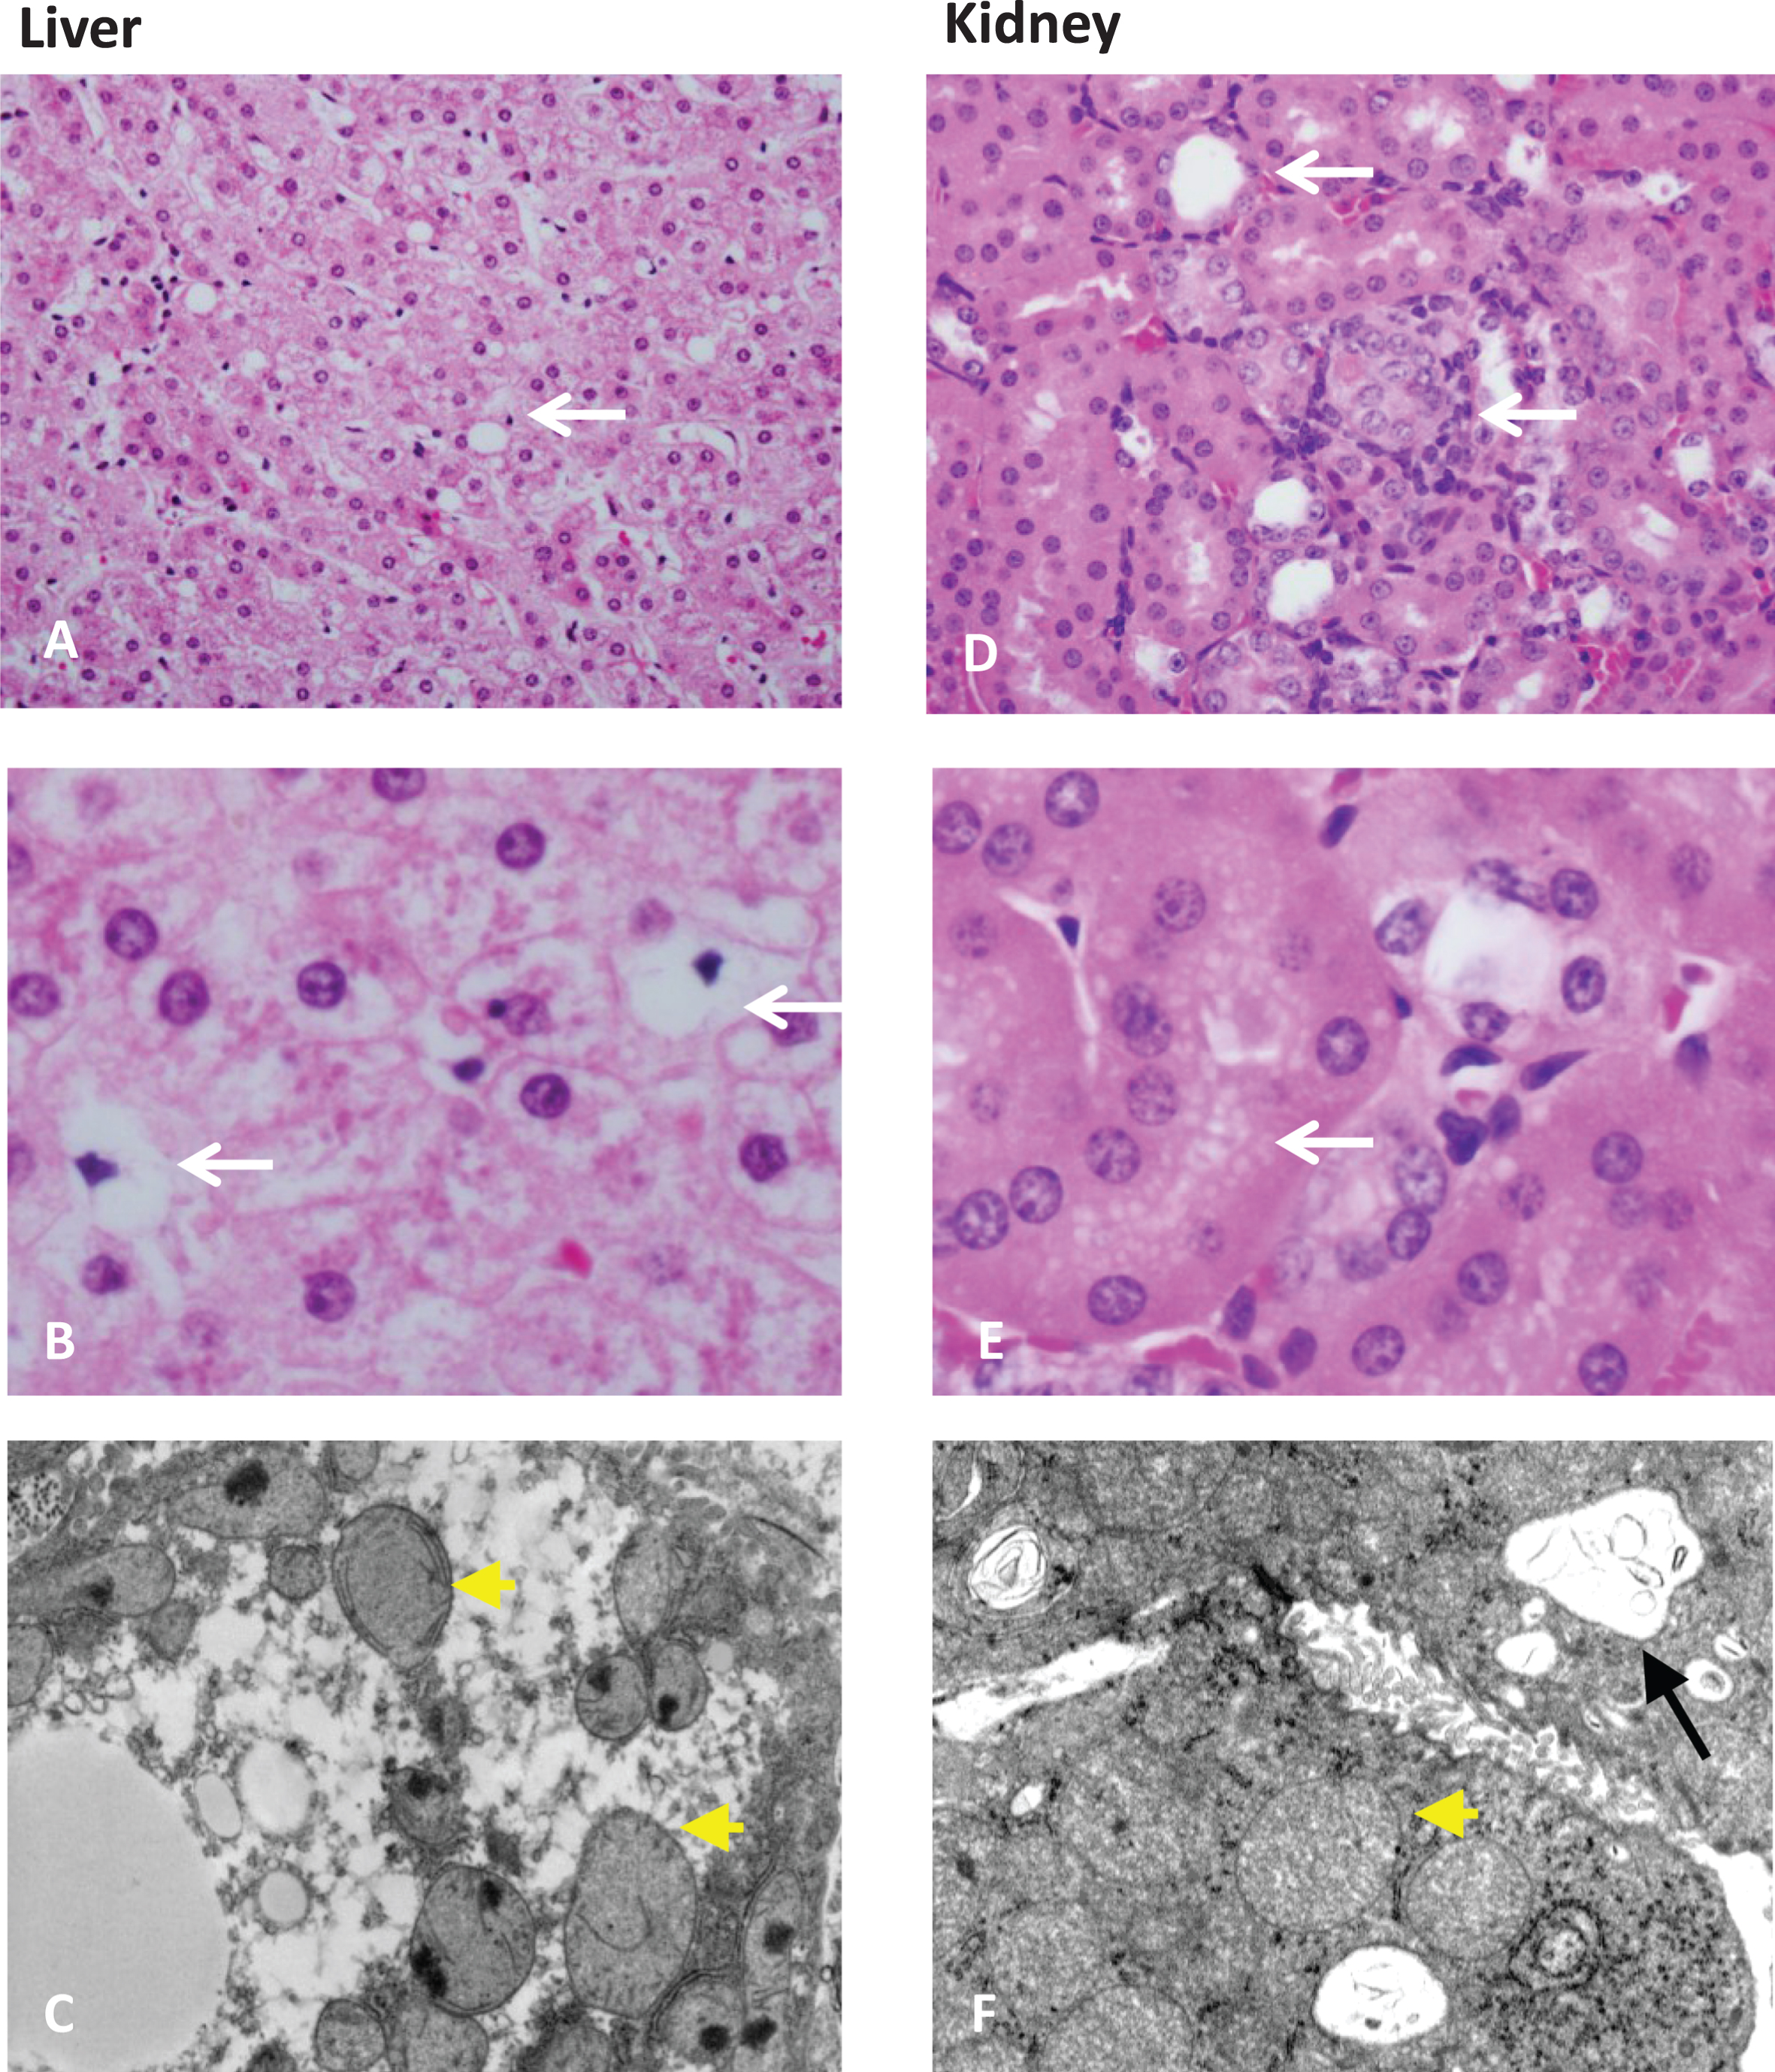 Organ pathology in methylmalonic acidemia. Liver and kidney pathology from patients with mut0 methylmalonic acidemia are presented. Mild steatosis (A), lipid-laden stellate cells (white arrows) (B), with abnormal mitochondrial ultrastructure on transmission electron microscopy (EM) (pale mitochondria with absent or disorganized cristae, yellow arrowheads) are observed in patient livers. Tubulointerstitial nephritis with patchy interstitial chronic inflammation and tubular dilation (A), proximal tubule vacuolization (B) (white arrows), and enlarged mitochondria with disorganized cristae (yellow arrowhead) along with large remnant vacuoles that contained amorphous membranous inclusions (black arrow) on transmission EM are present in patient kidneys. Pathology was obtained from explanted organs after a combined liver and kidney transplantation procedure. Patients were enrolled in the clinical study: NCT00078078.